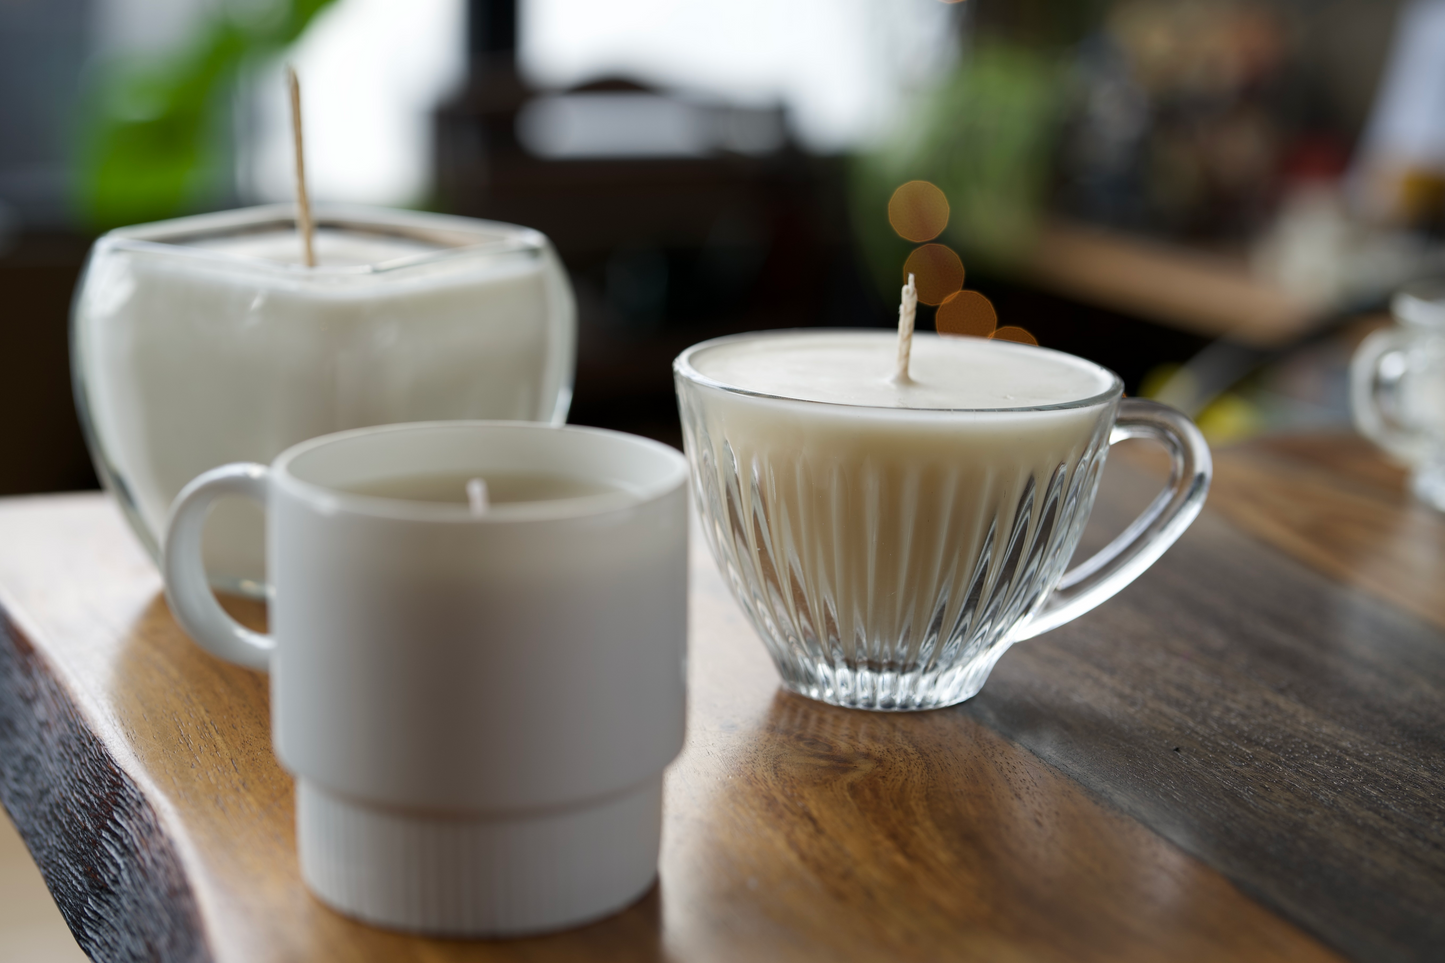 Three pure white, unlit soy wax candles. They are resting on a dark wood table, with bokeh lights in the background. One is white and two are clear glass. All three candles are modern, classy, and elegant.